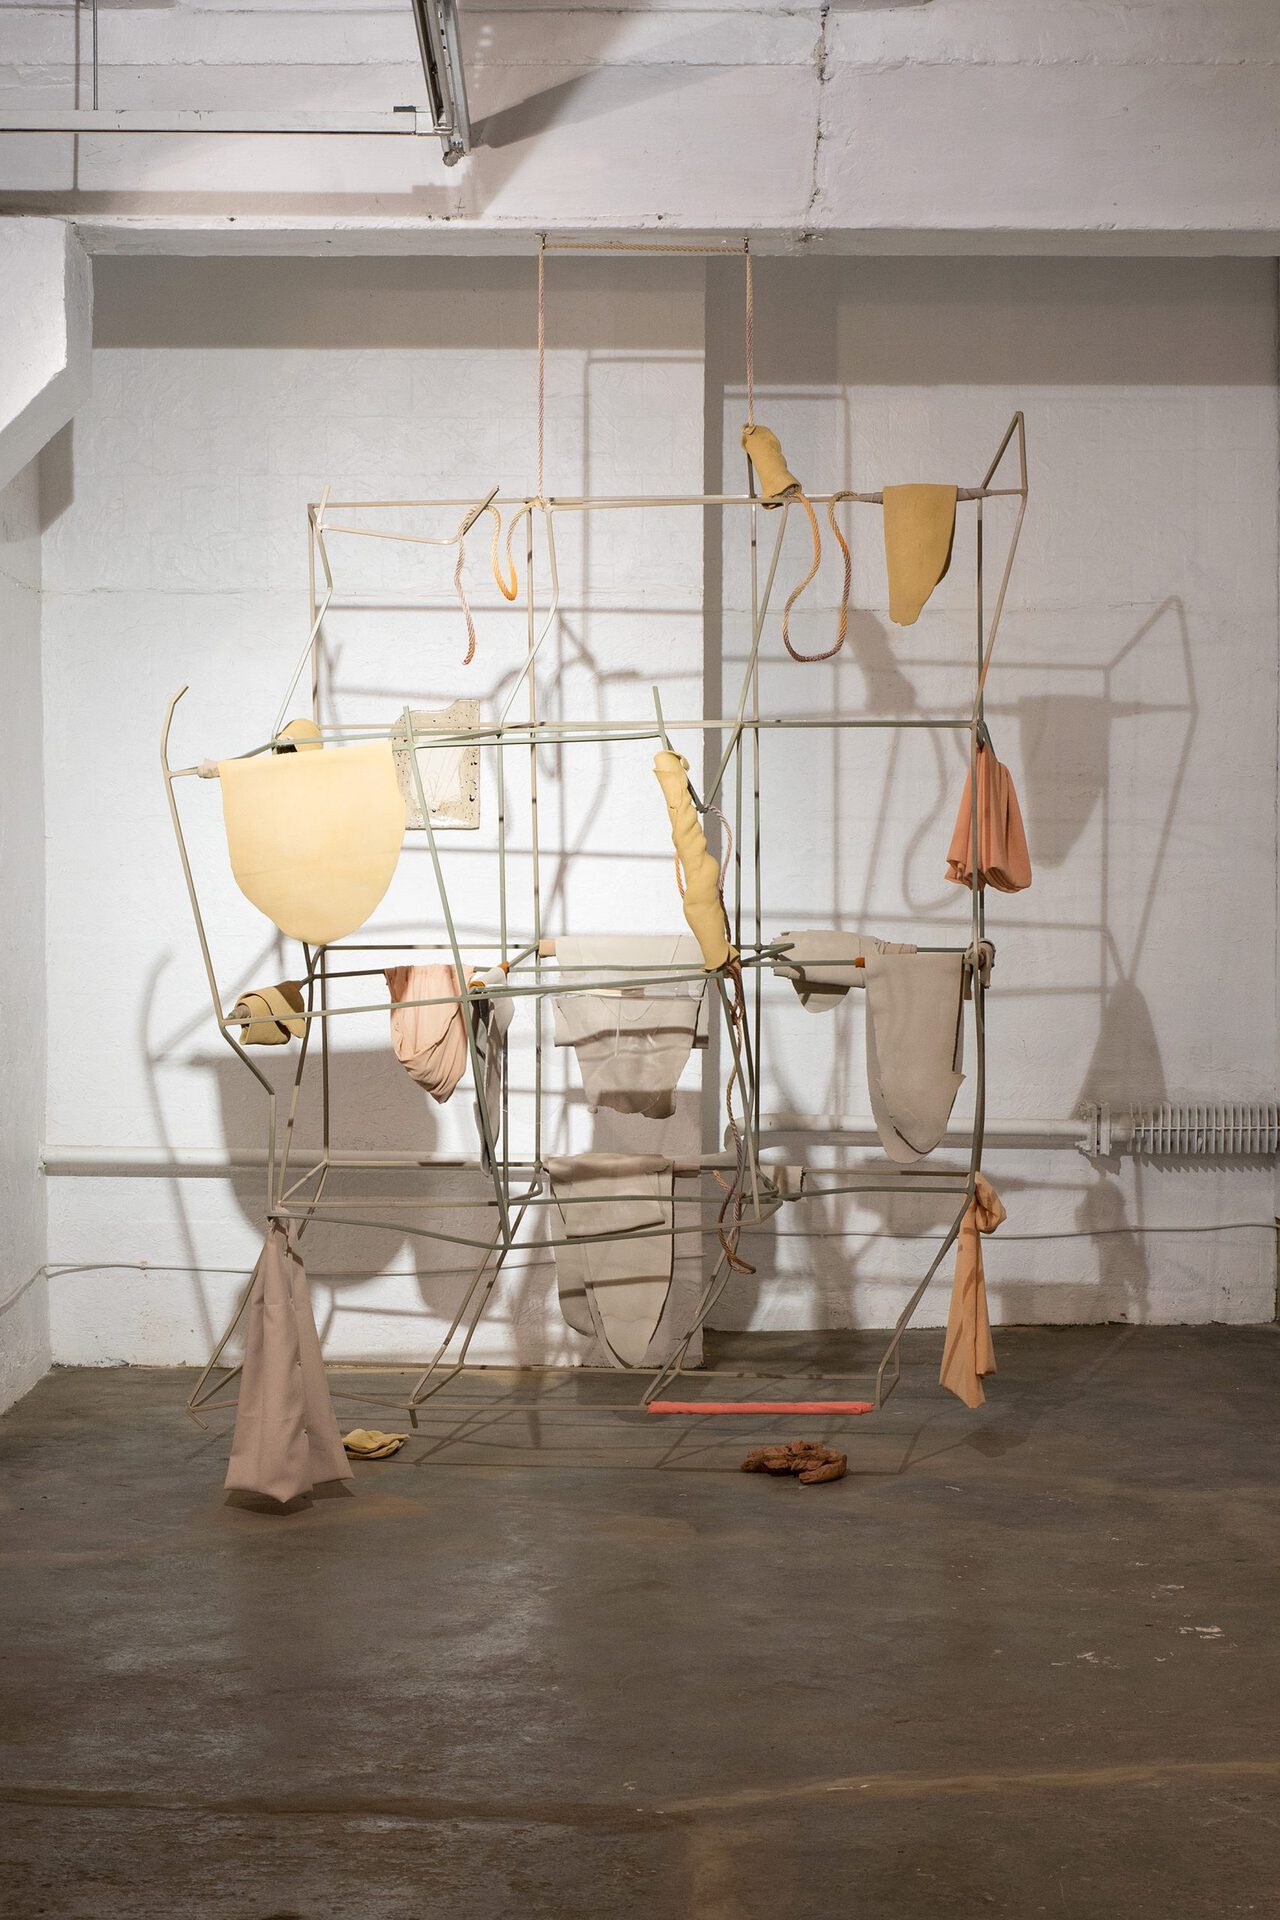 Laura Põld, Shared space, 2020. Steel, textile, clay, plexiglass, rope, spray paint